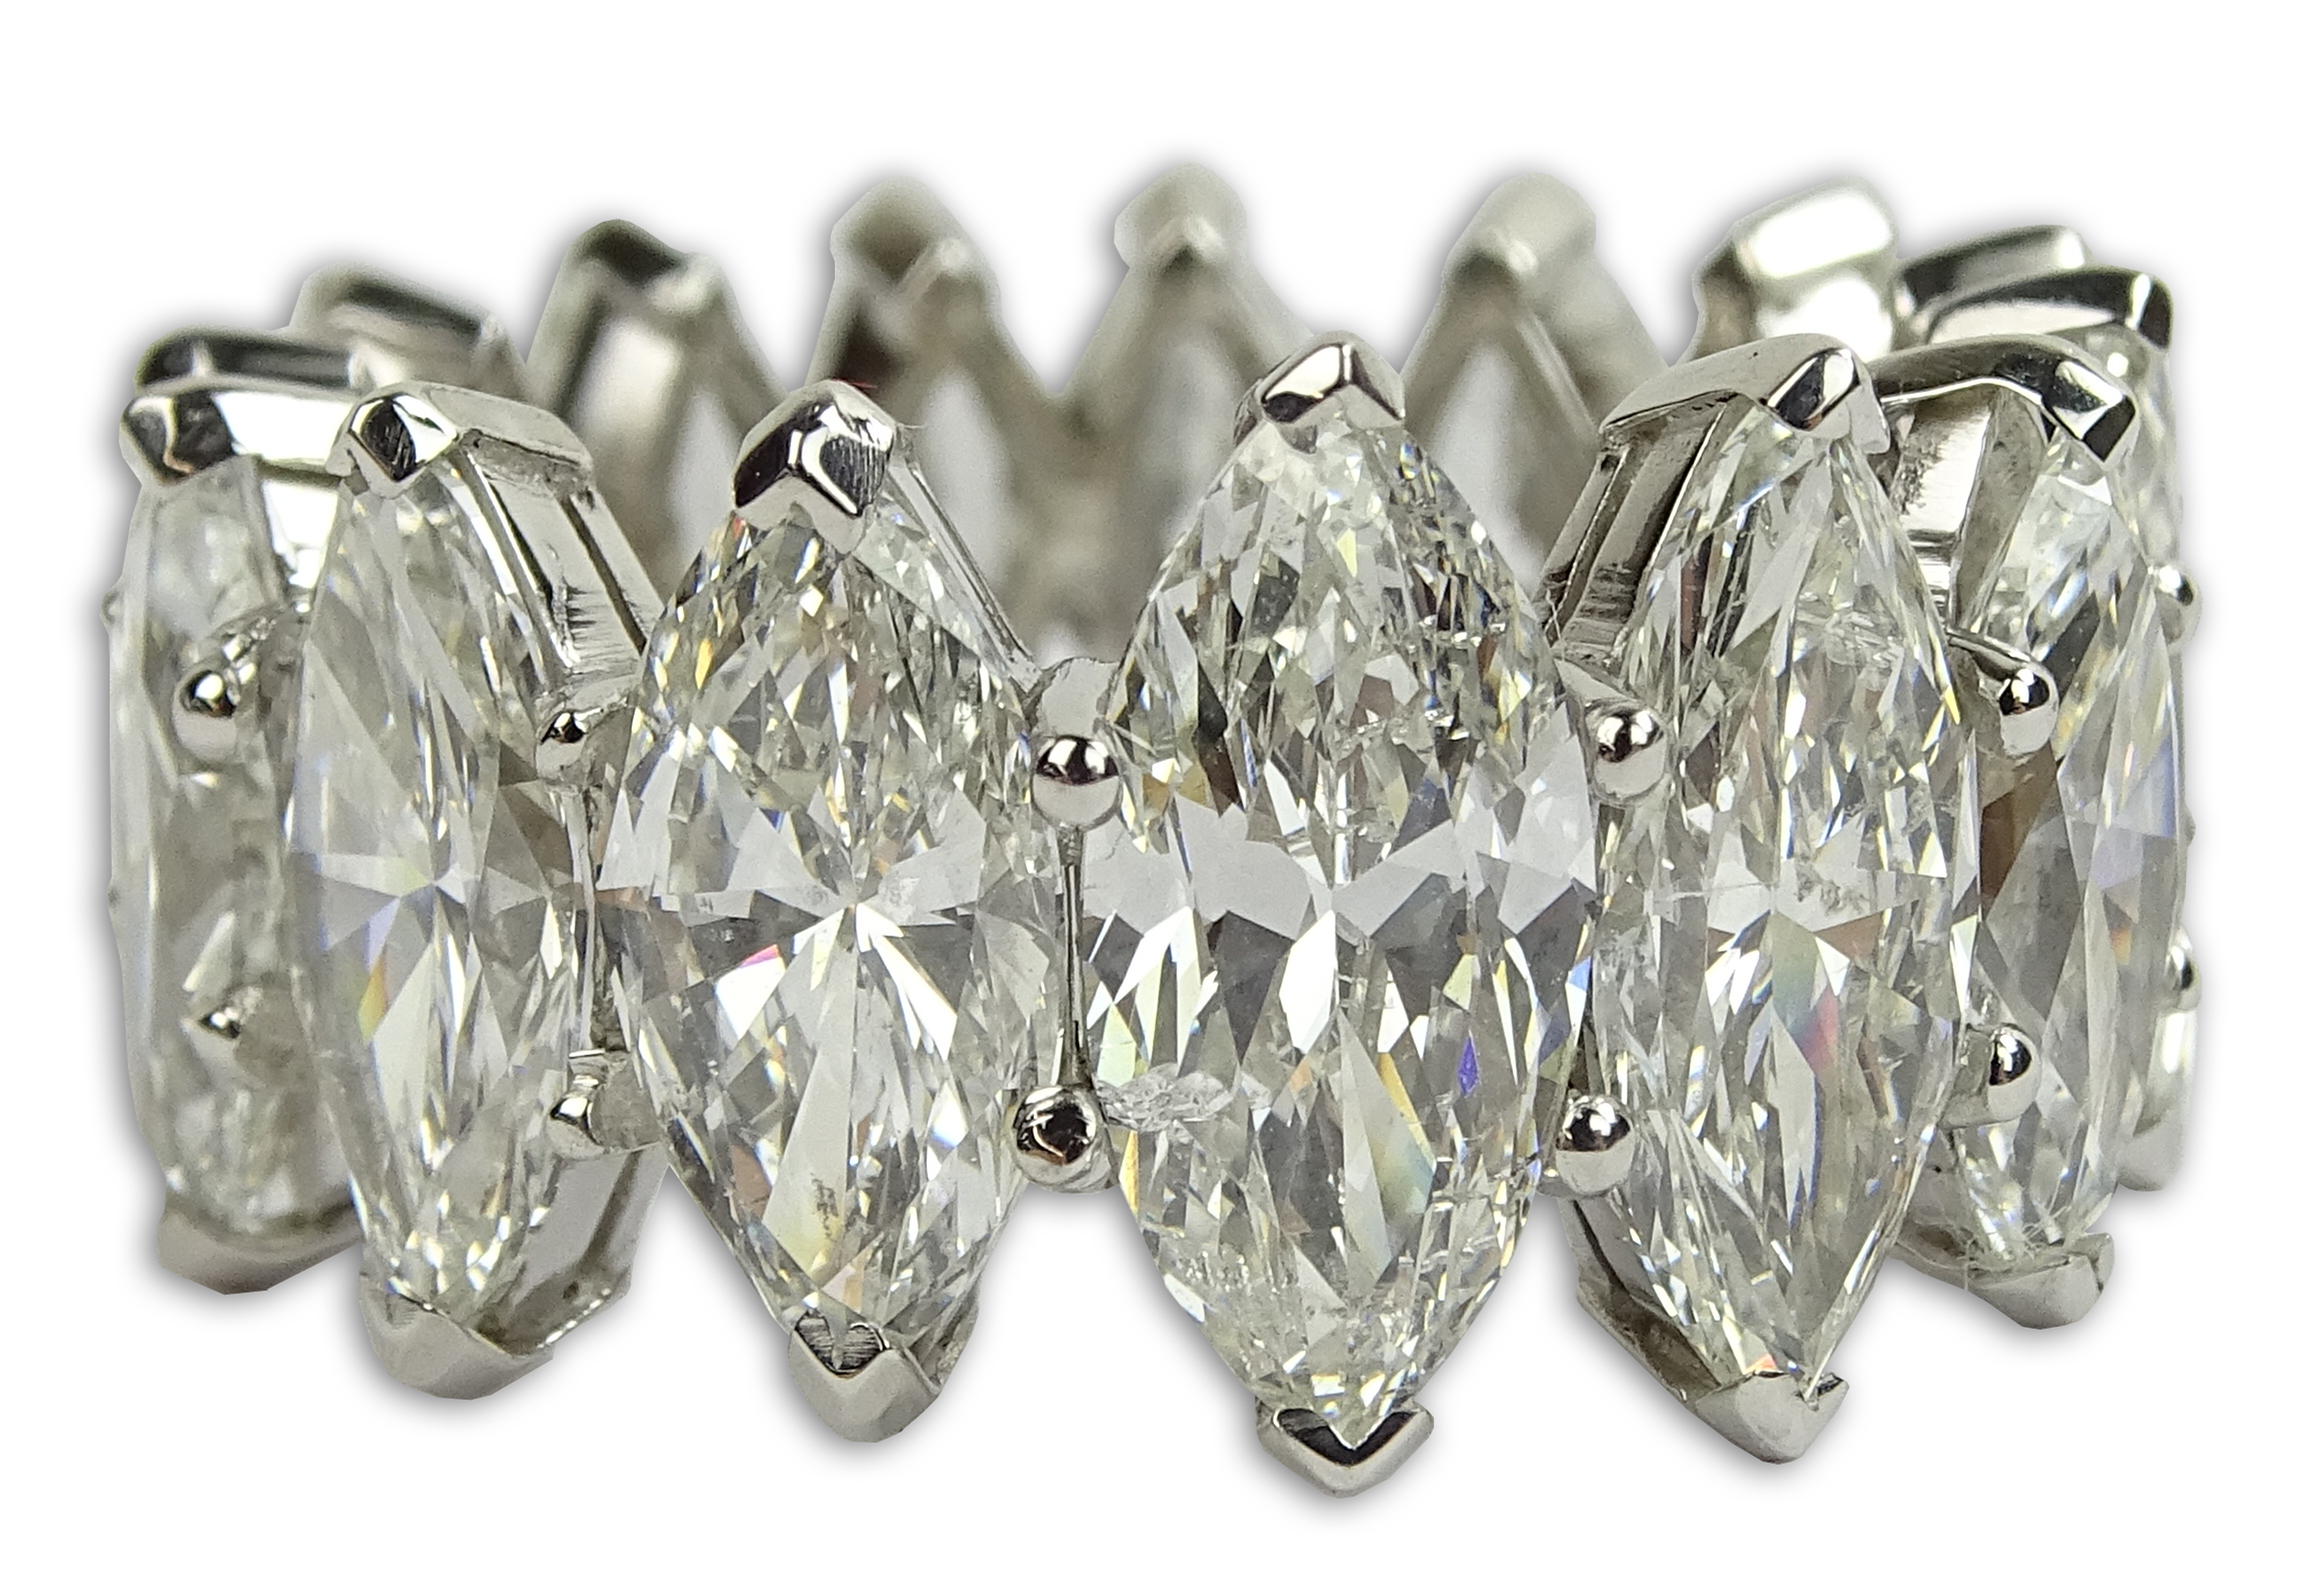 Approx. 15.0 Carat Marquise Cut Diamond and Platinum Eternity Band set with Fifteen (15) Diamonds.